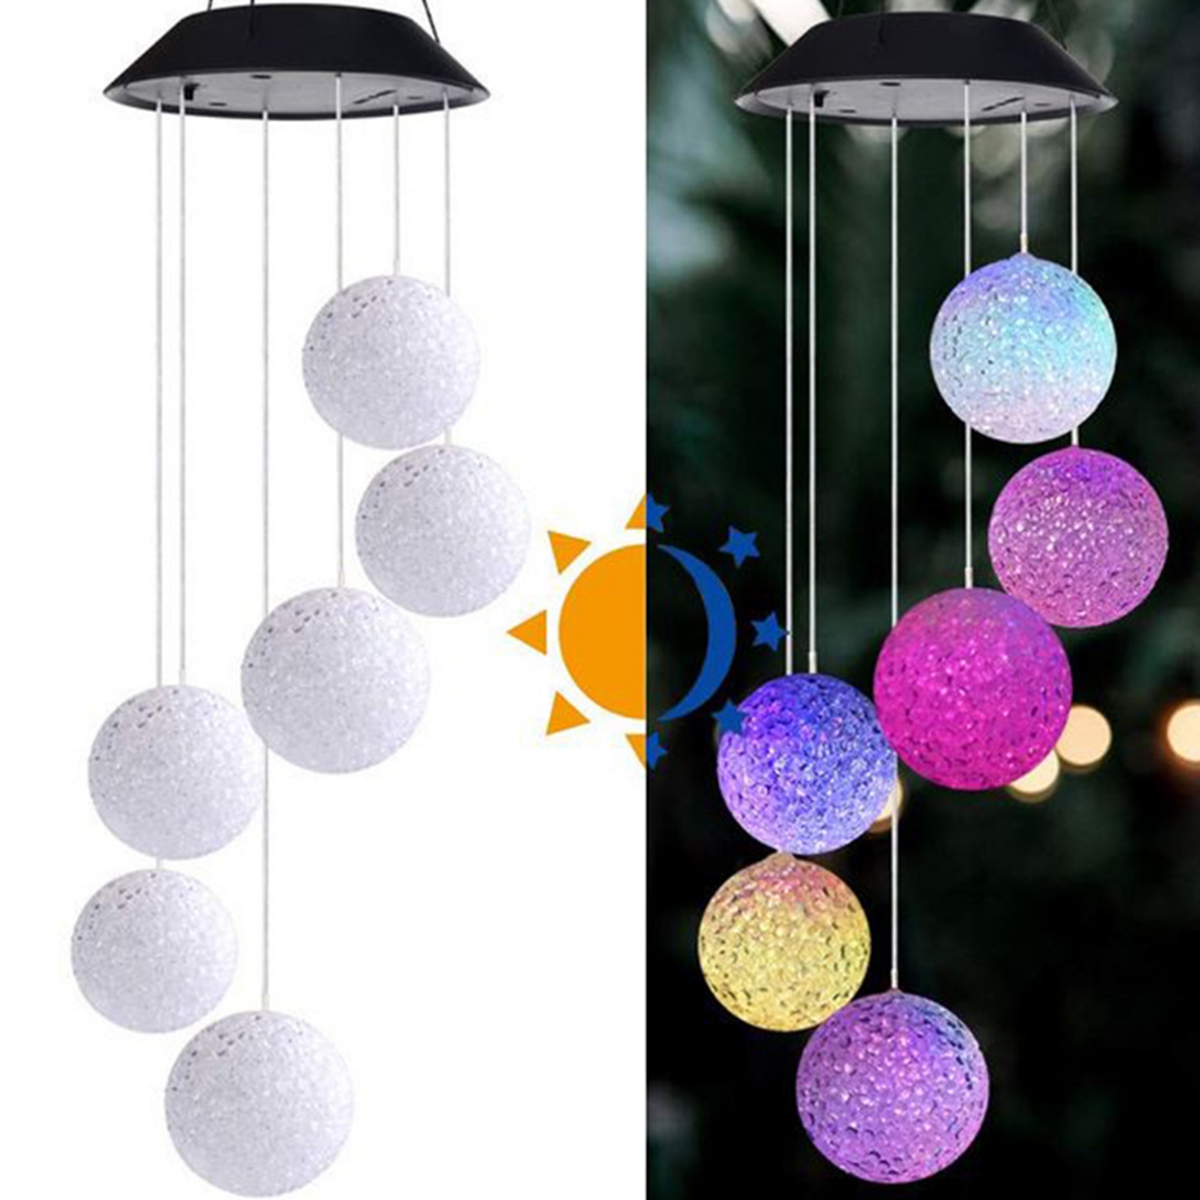 Wind-Chime-Light-Solar-Powered-Color-Changing-Outdoor-Home-Garden-Tree-Decor-LED-1727471-2